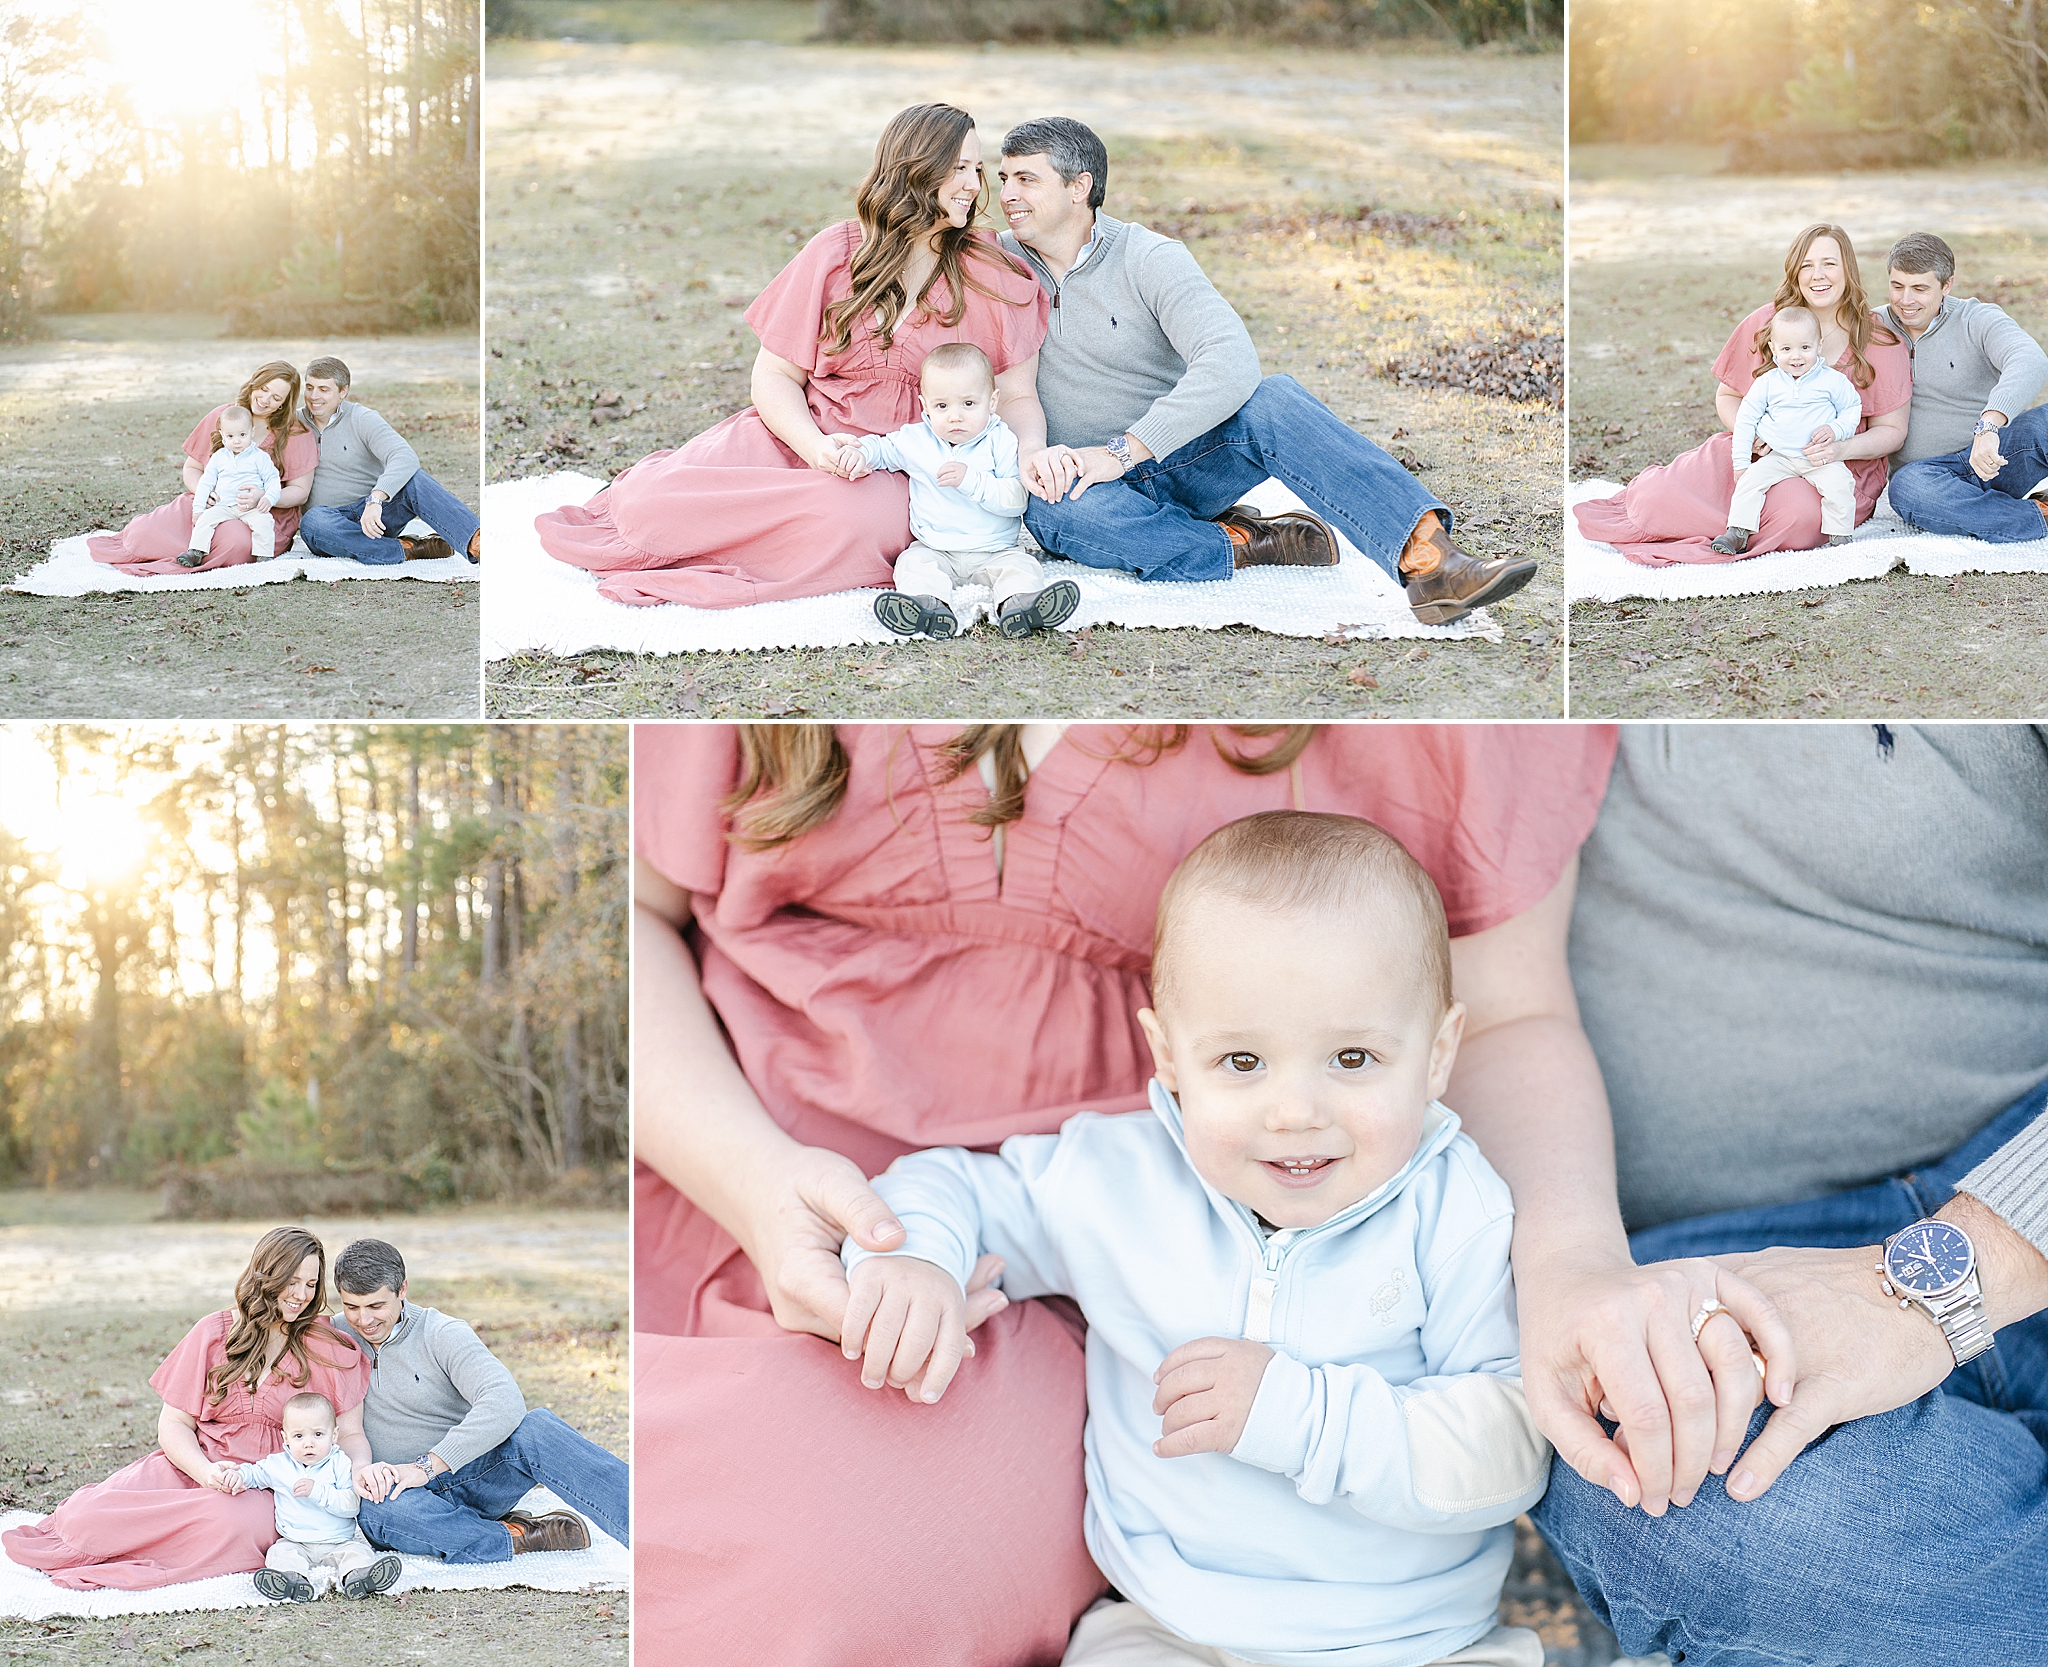 A mom, dad, and one year old baby boy snuggle together on a blanket during their outdoor family photography session with Emily Lofton Photography.